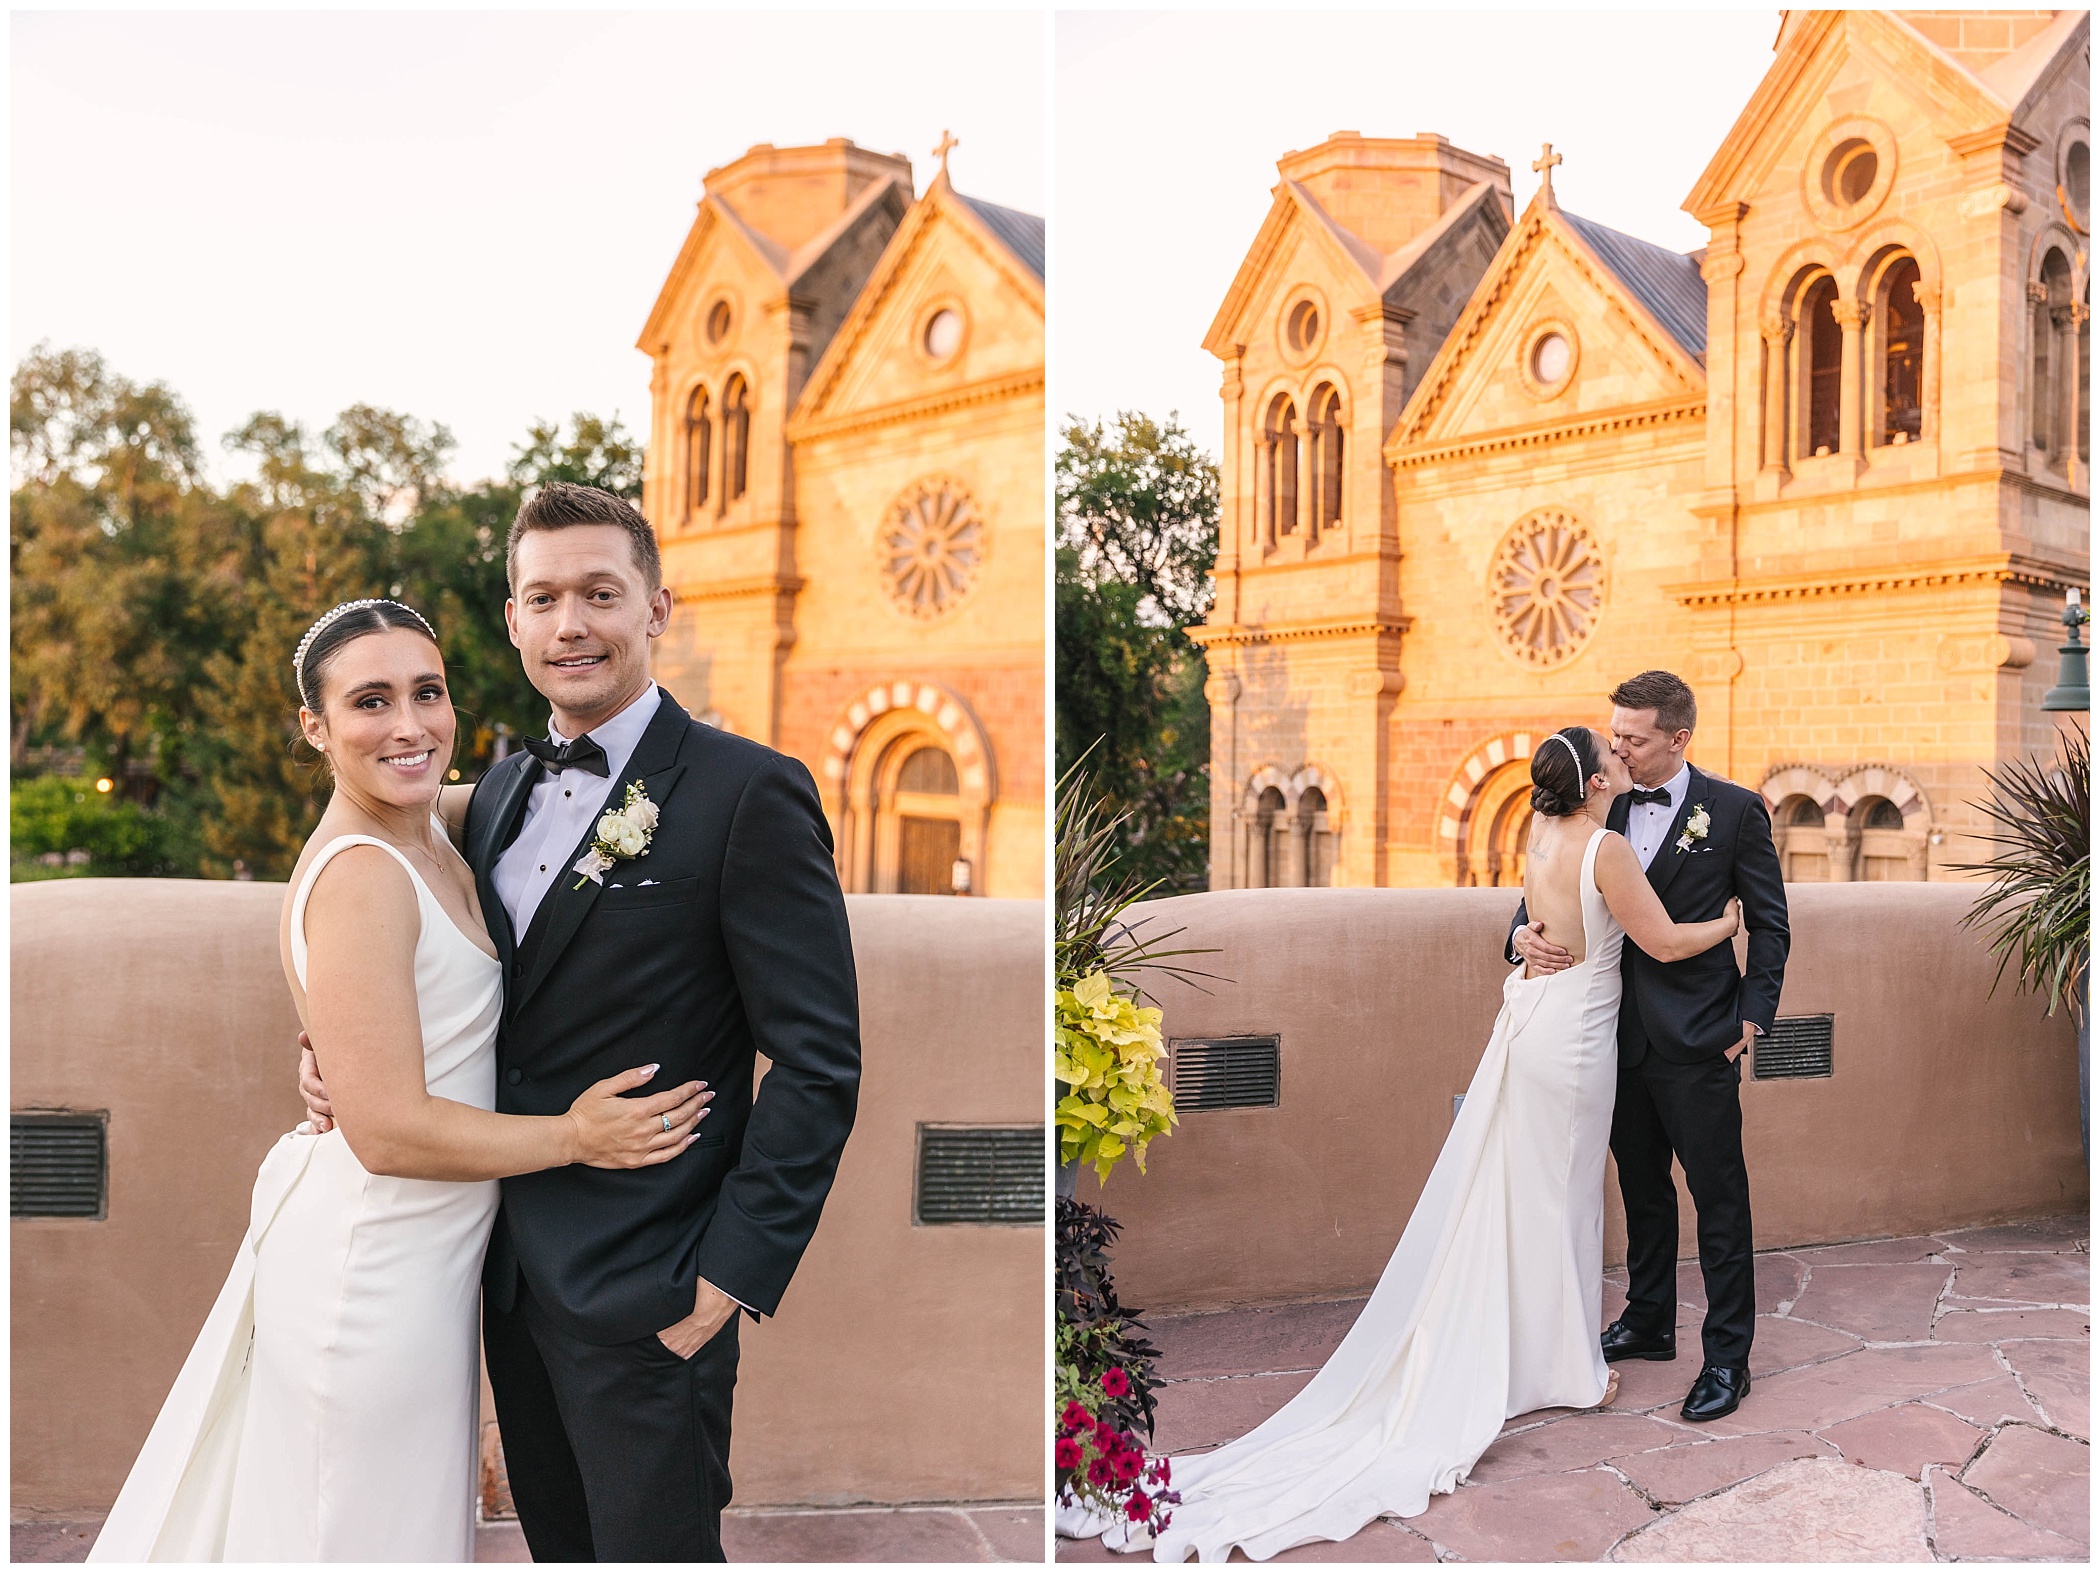 Sunset portraits of bride and groom at La Fonda on the Plaza wedding by Santa Fe Cathedral Basilica